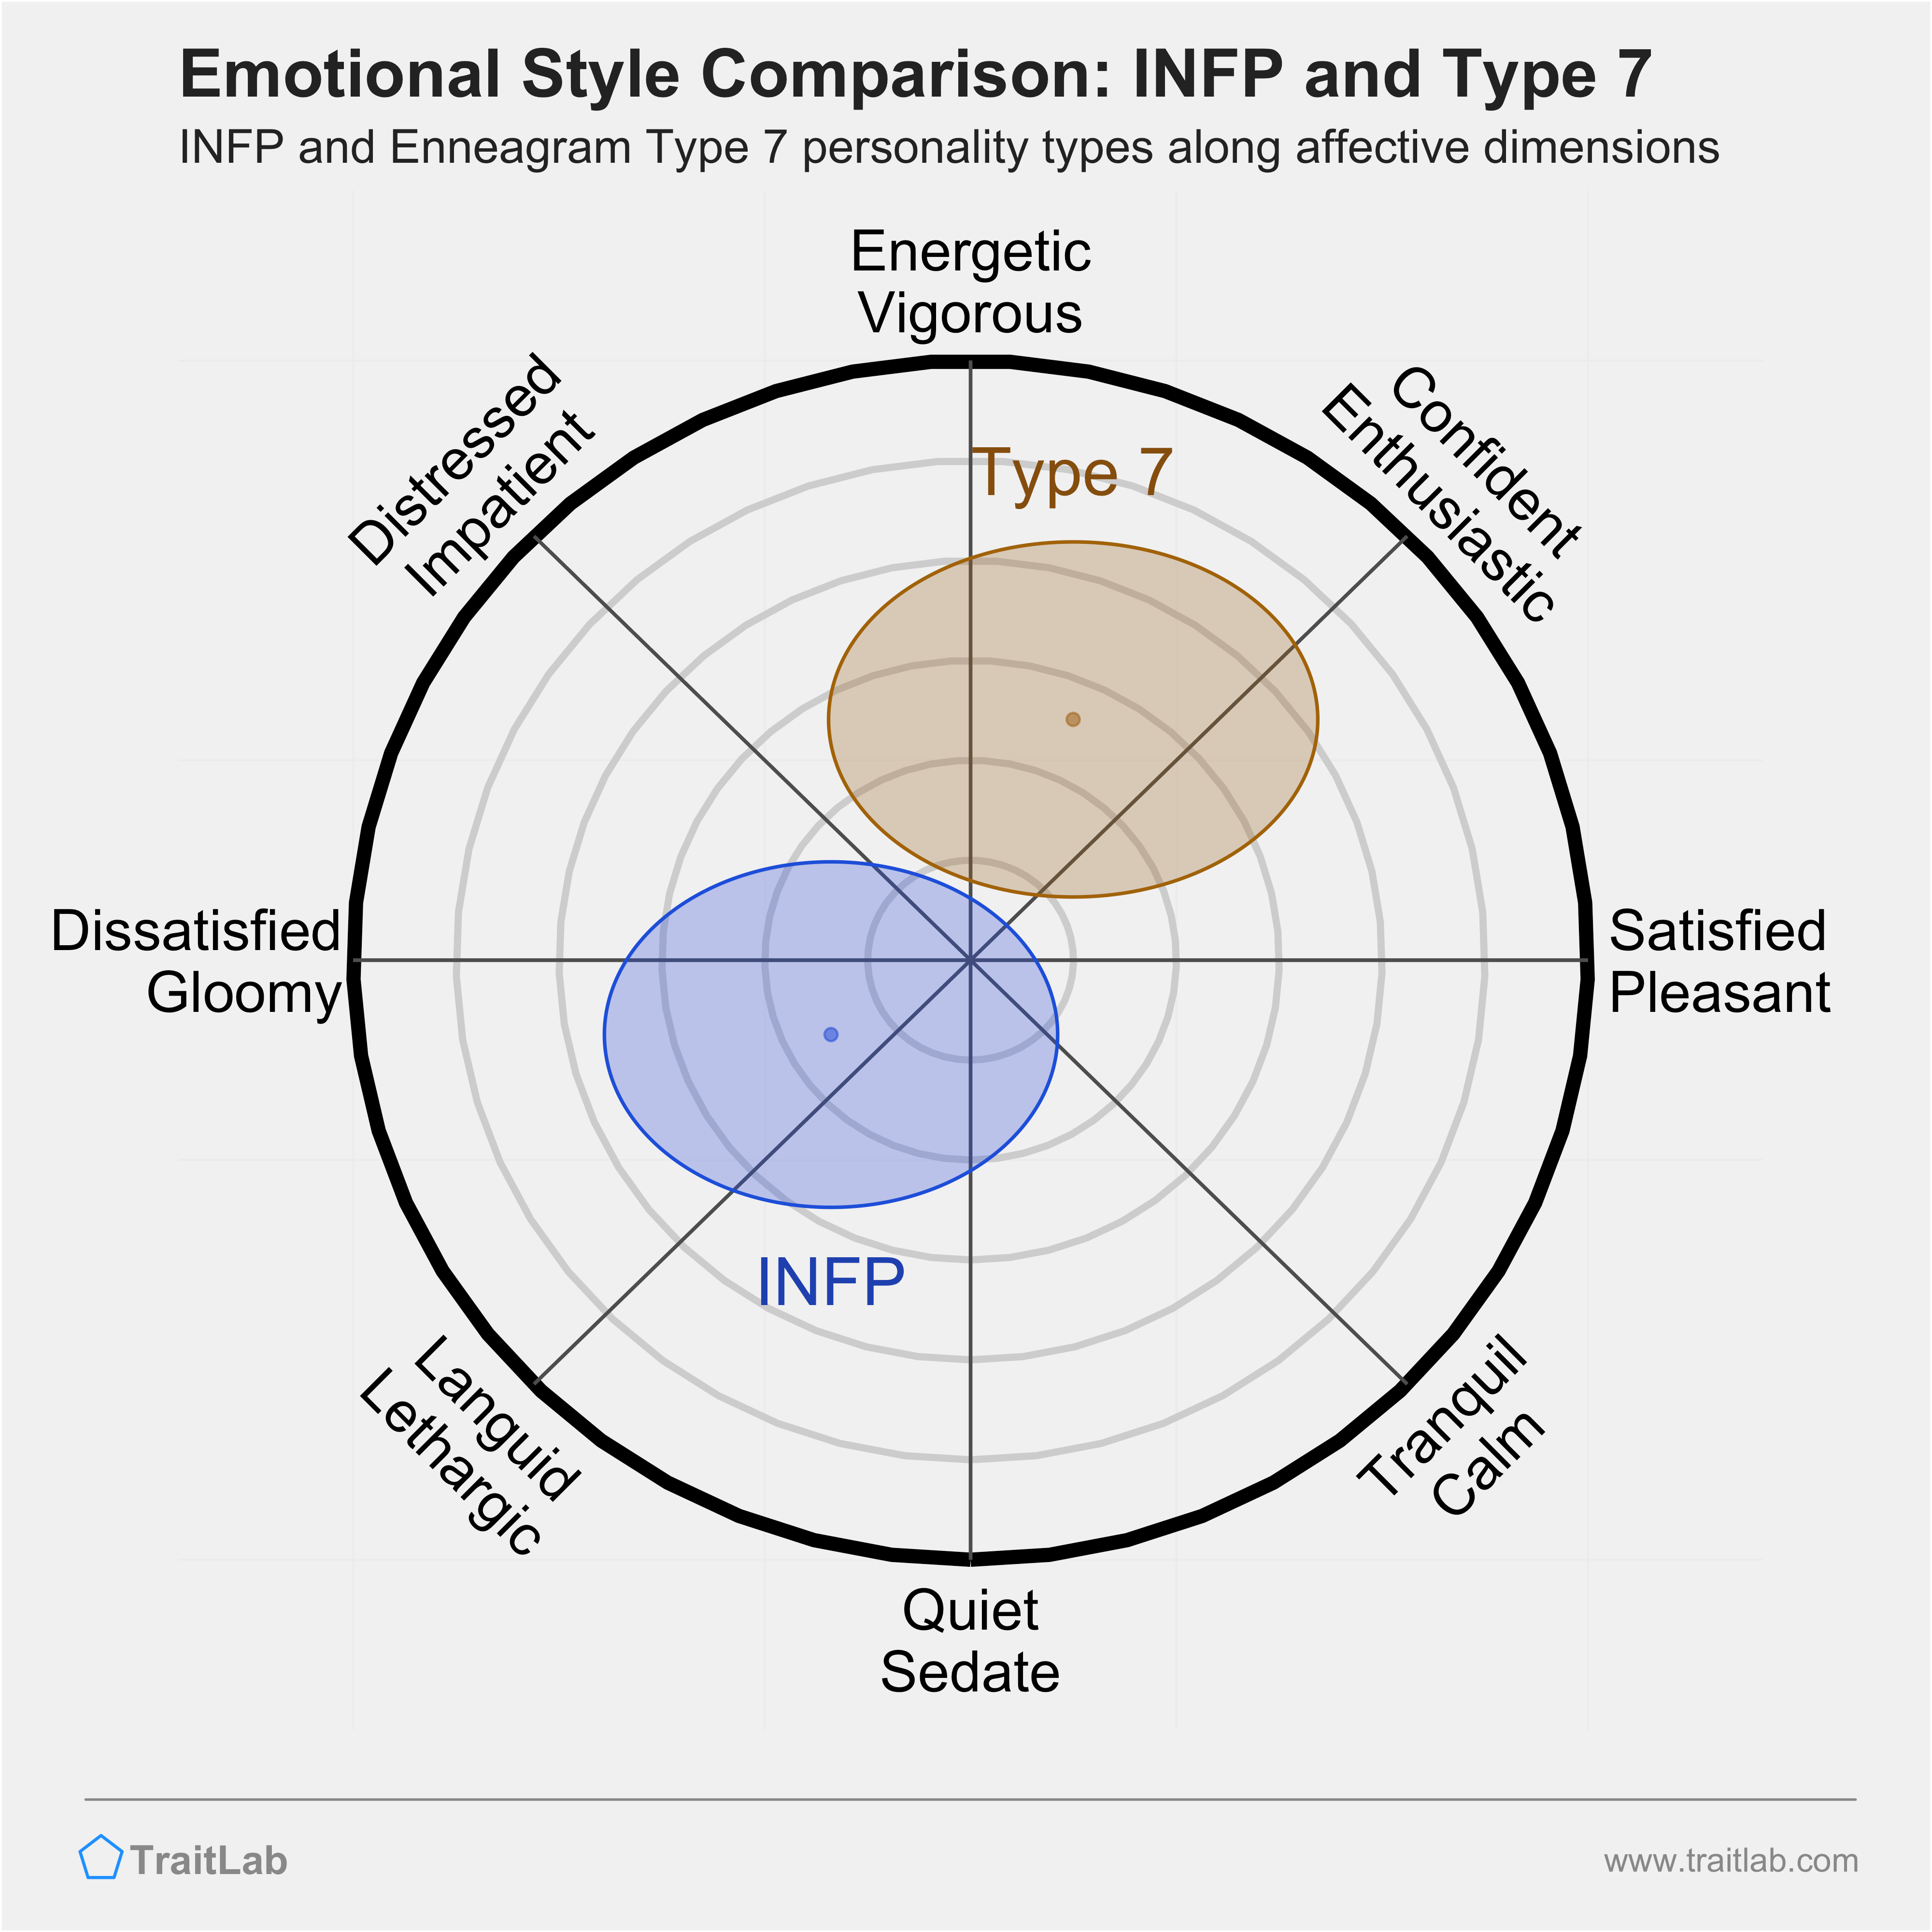 INFP and Type 7 comparison across emotional (affective) dimensions